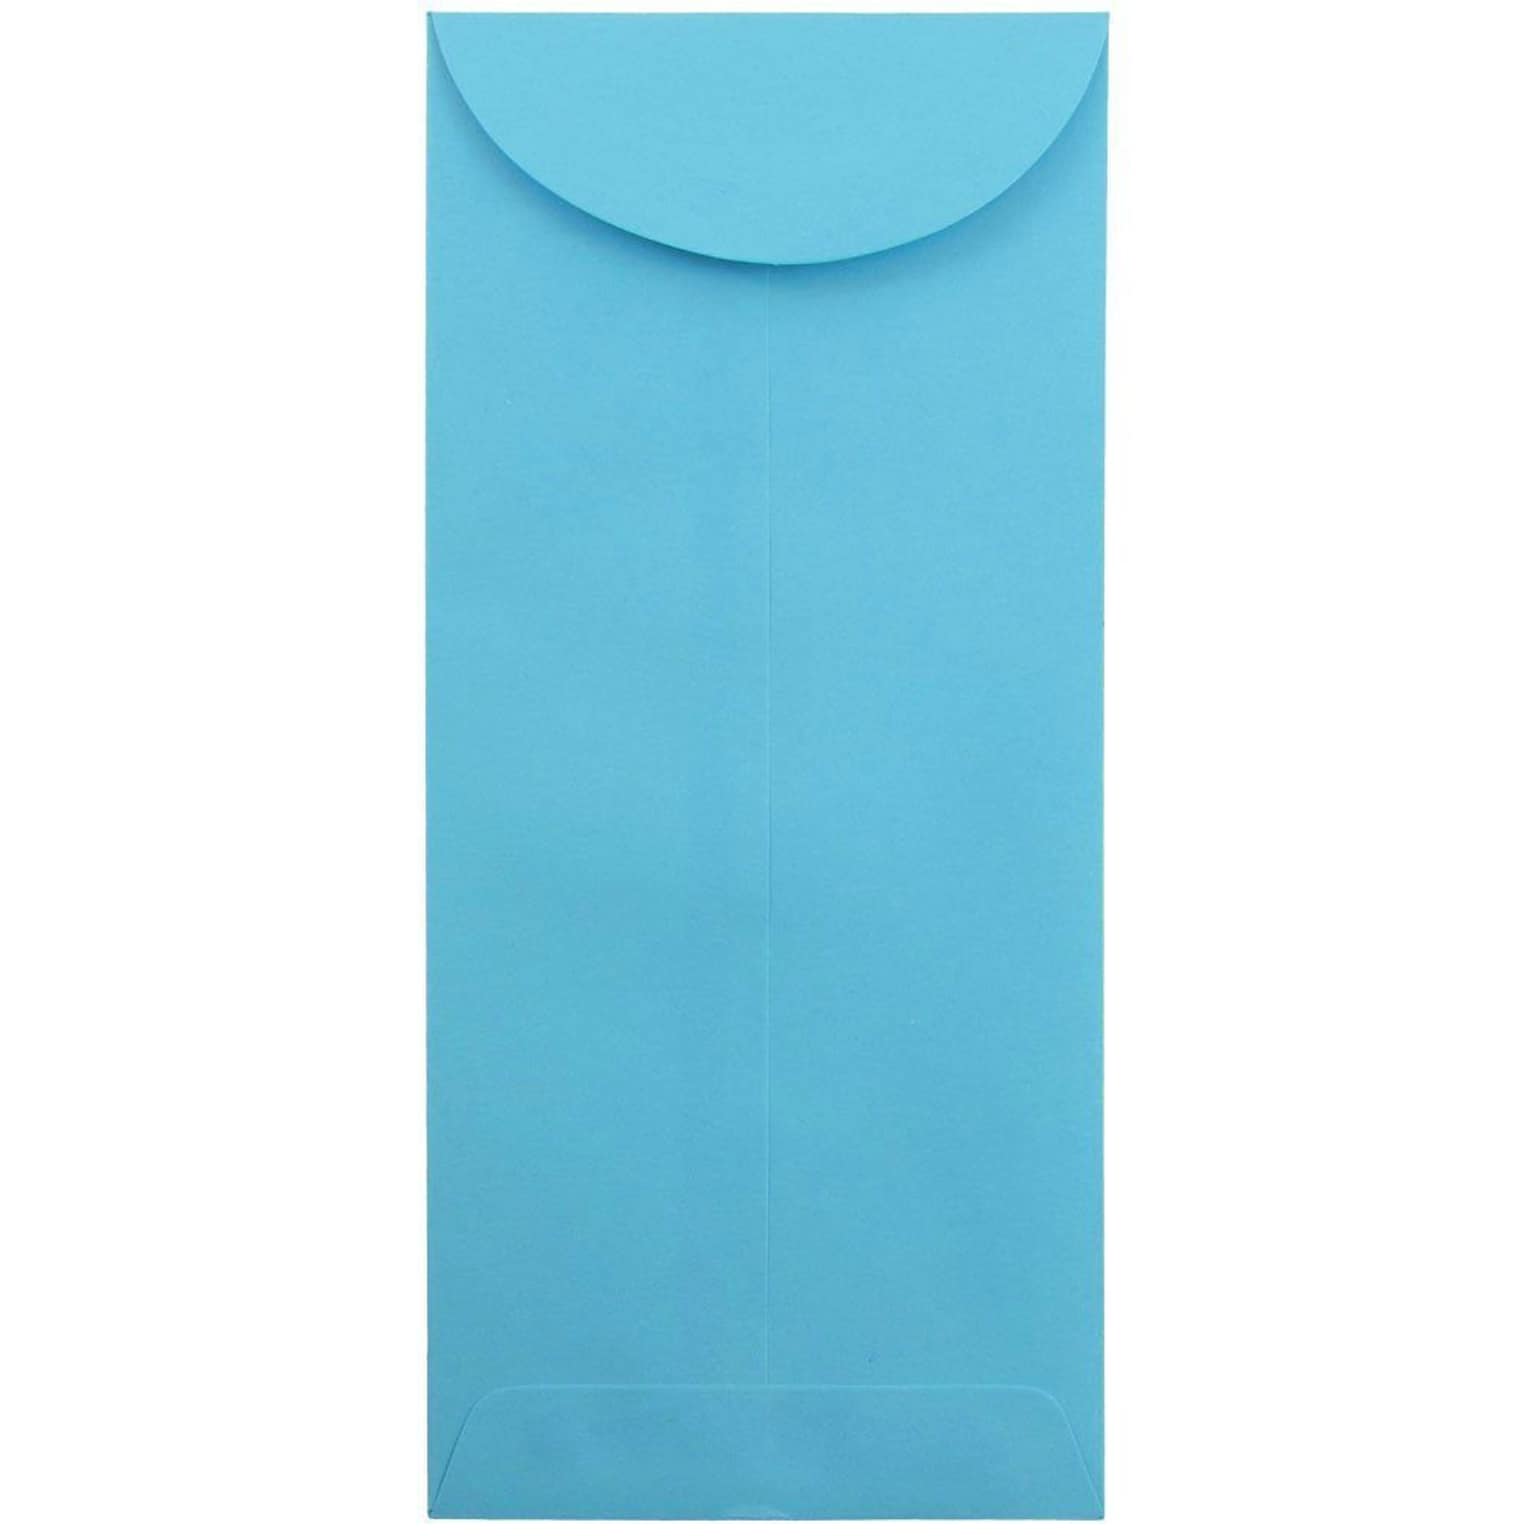 JAM Paper #14 Policy Business Colored Envelopes, 5 x 11 1/2, Blue Brite Hue, 50/Pack (3156407I)